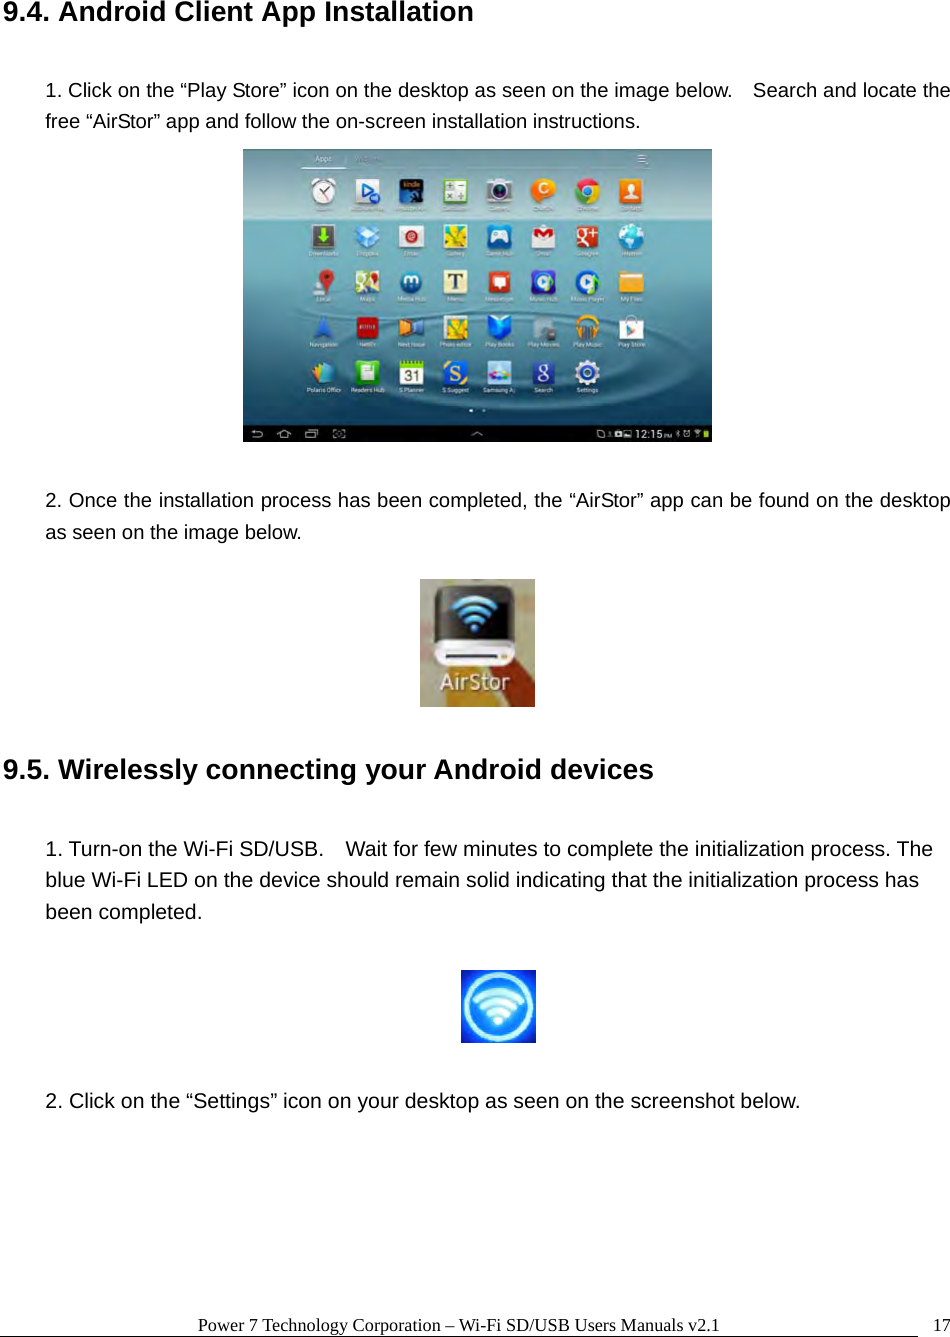 Power 7 Technology Corporation – Wi-Fi SD/USB Users Manuals v2.1  179.4. Android Client App Installation  1. Click on the “Play Store” icon on the desktop as seen on the image below.    Search and locate the free “AirStor” app and follow the on-screen installation instructions.   2. Once the installation process has been completed, the “AirStor” app can be found on the desktop as seen on the image below.    9.5. Wirelessly connecting your Android devices  1. Turn-on the Wi-Fi SD/USB.    Wait for few minutes to complete the initialization process. The blue Wi-Fi LED on the device should remain solid indicating that the initialization process has been completed.    2. Click on the “Settings” icon on your desktop as seen on the screenshot below.  